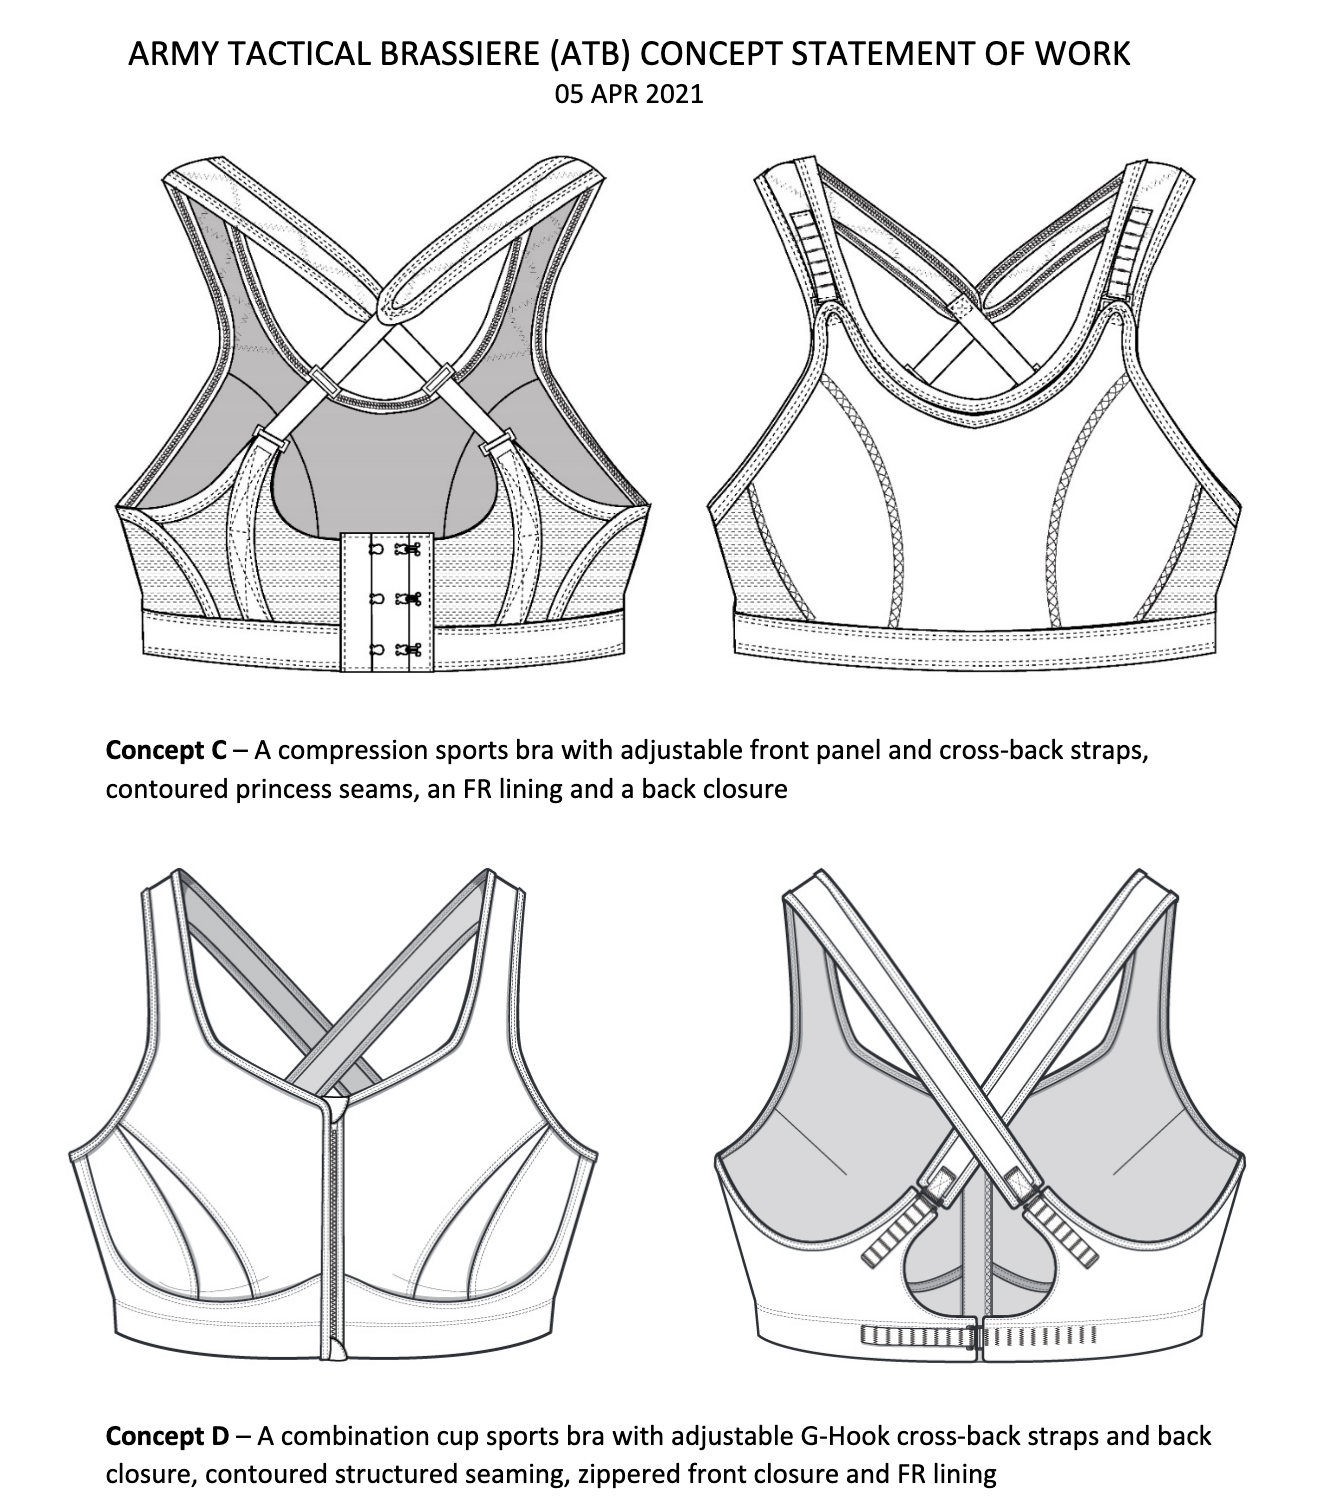 ABC News - Experts have developed four prototypes of the Army Tactical  Brassiere, the branch's first high-impact, flame-resistant sports bra.